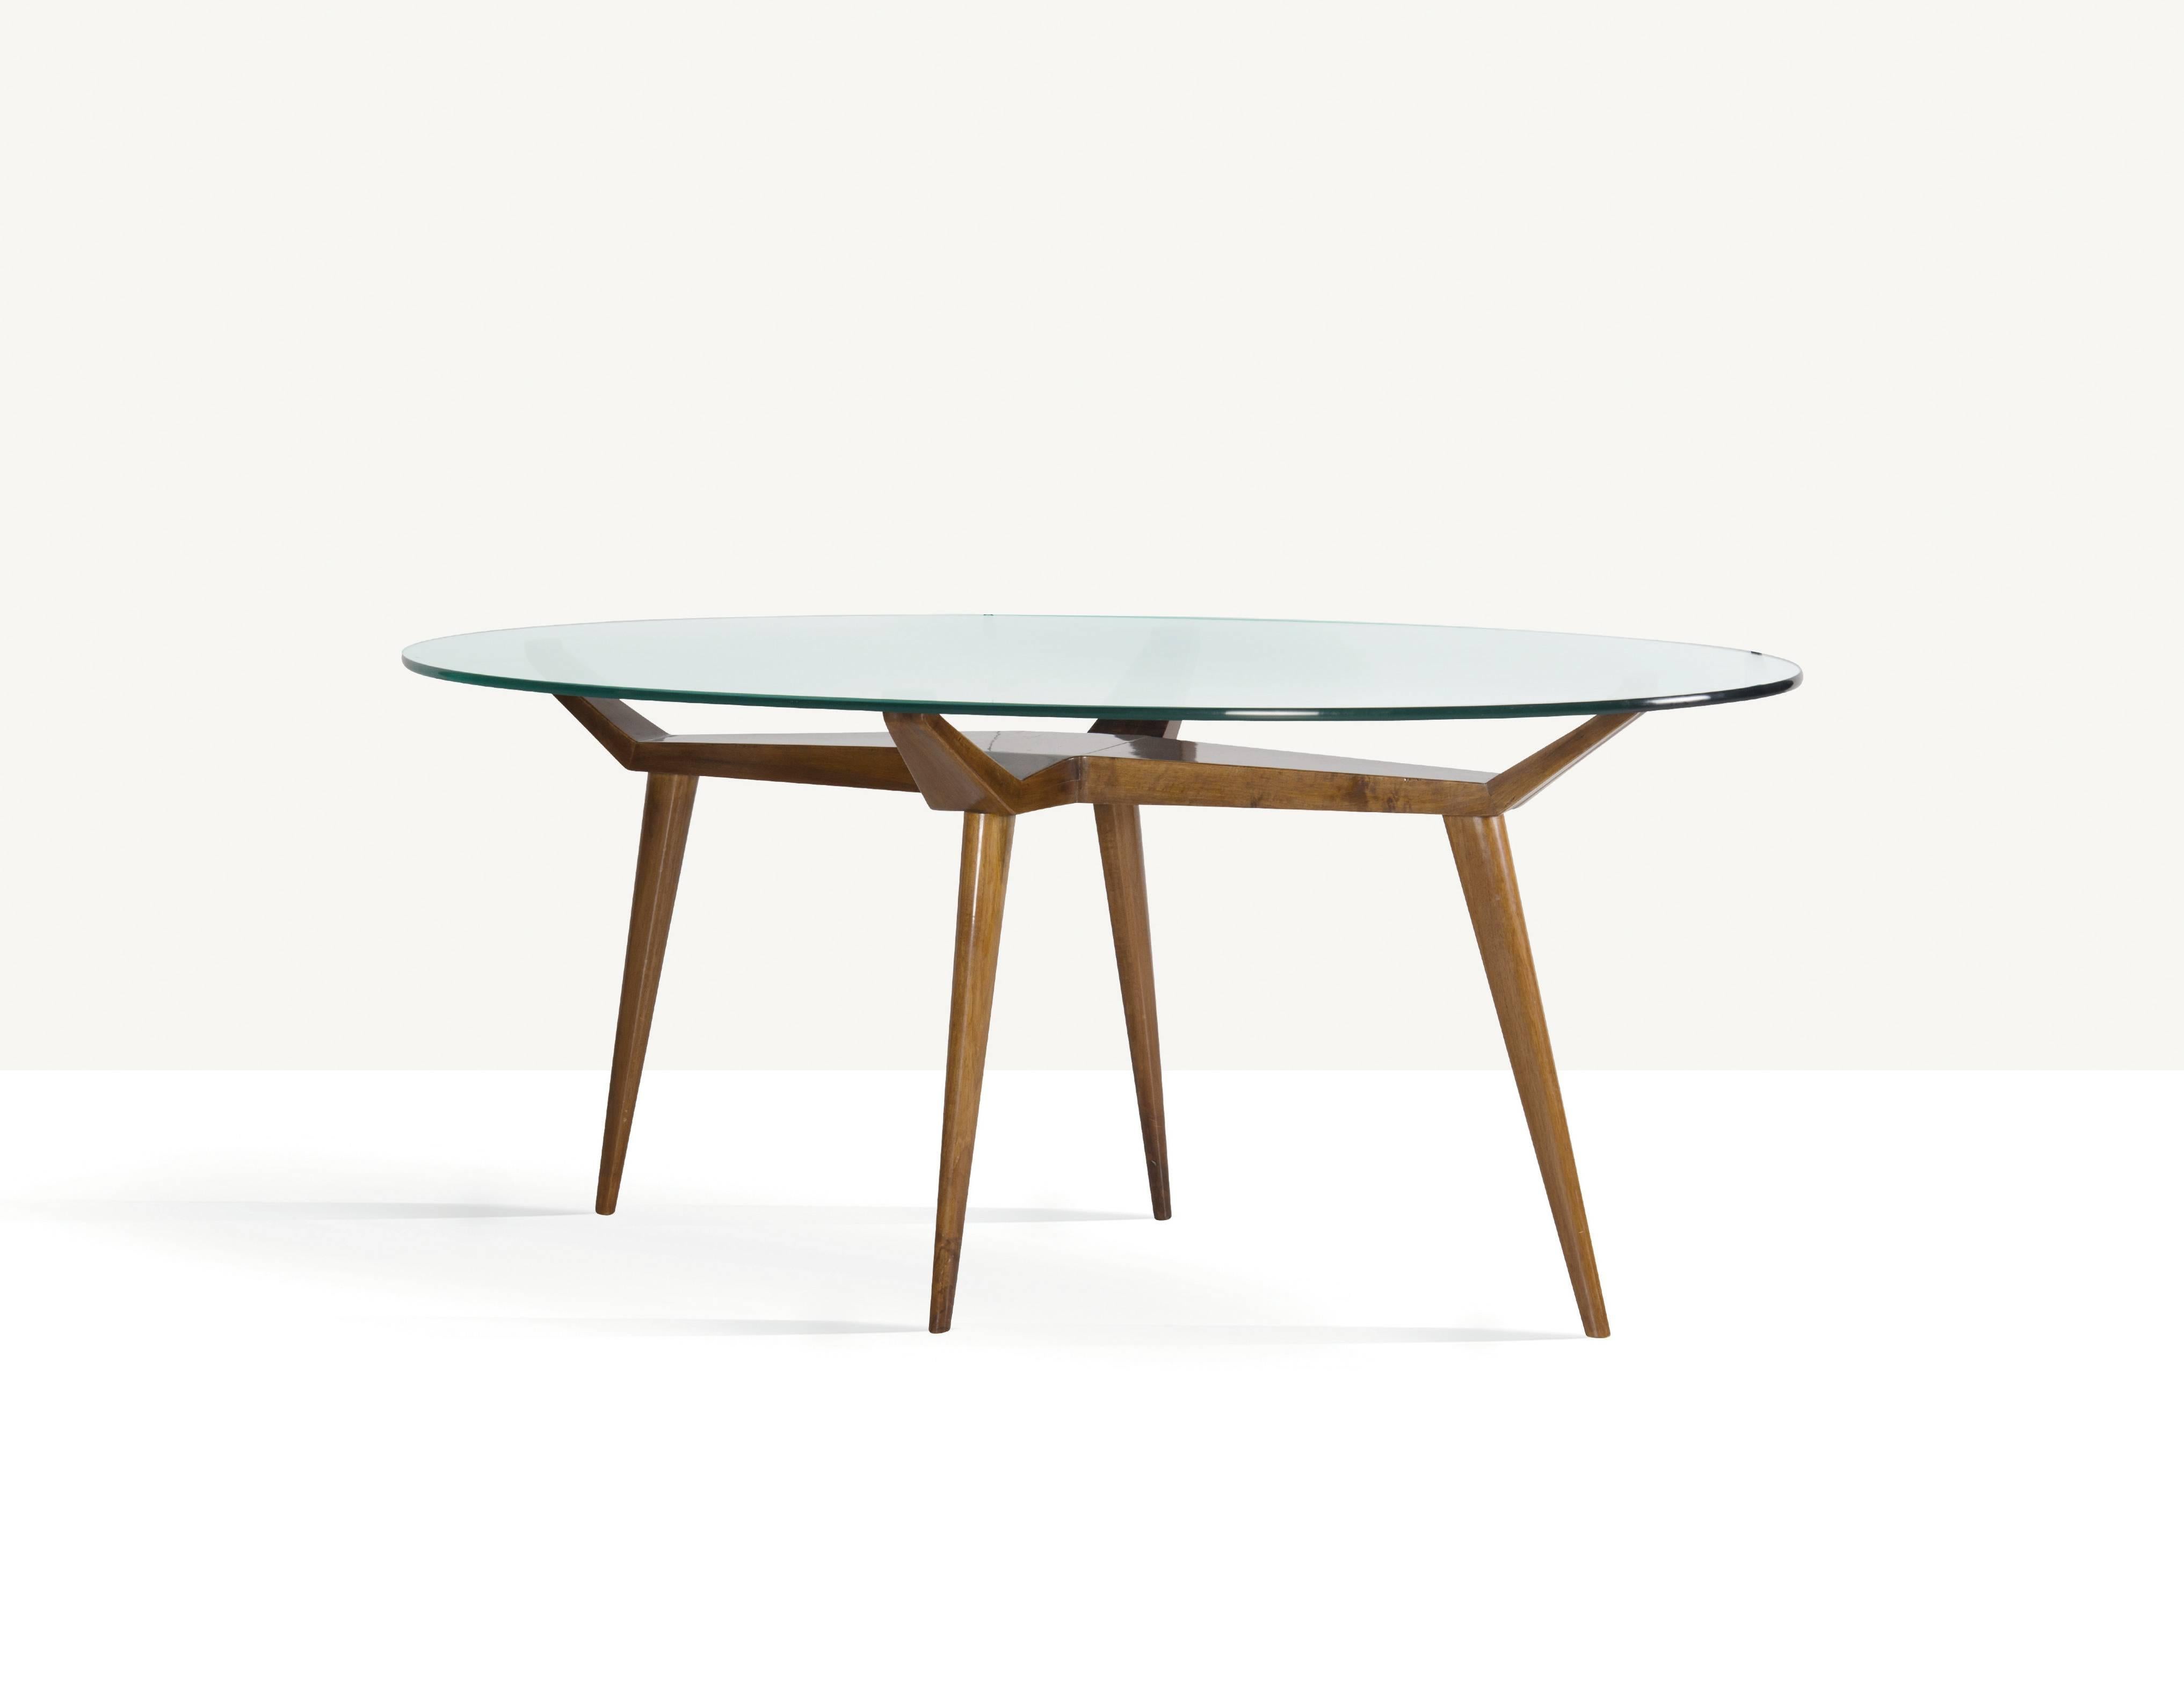 A rare, significant and elegant biomorphic dining table attributed to pioneering Italian midcentury designer Pierluigi Giordani, a contemporary of Ico Parisi and Gio Ponti.  With a large oval glass top resting on four points of a sharply angled,